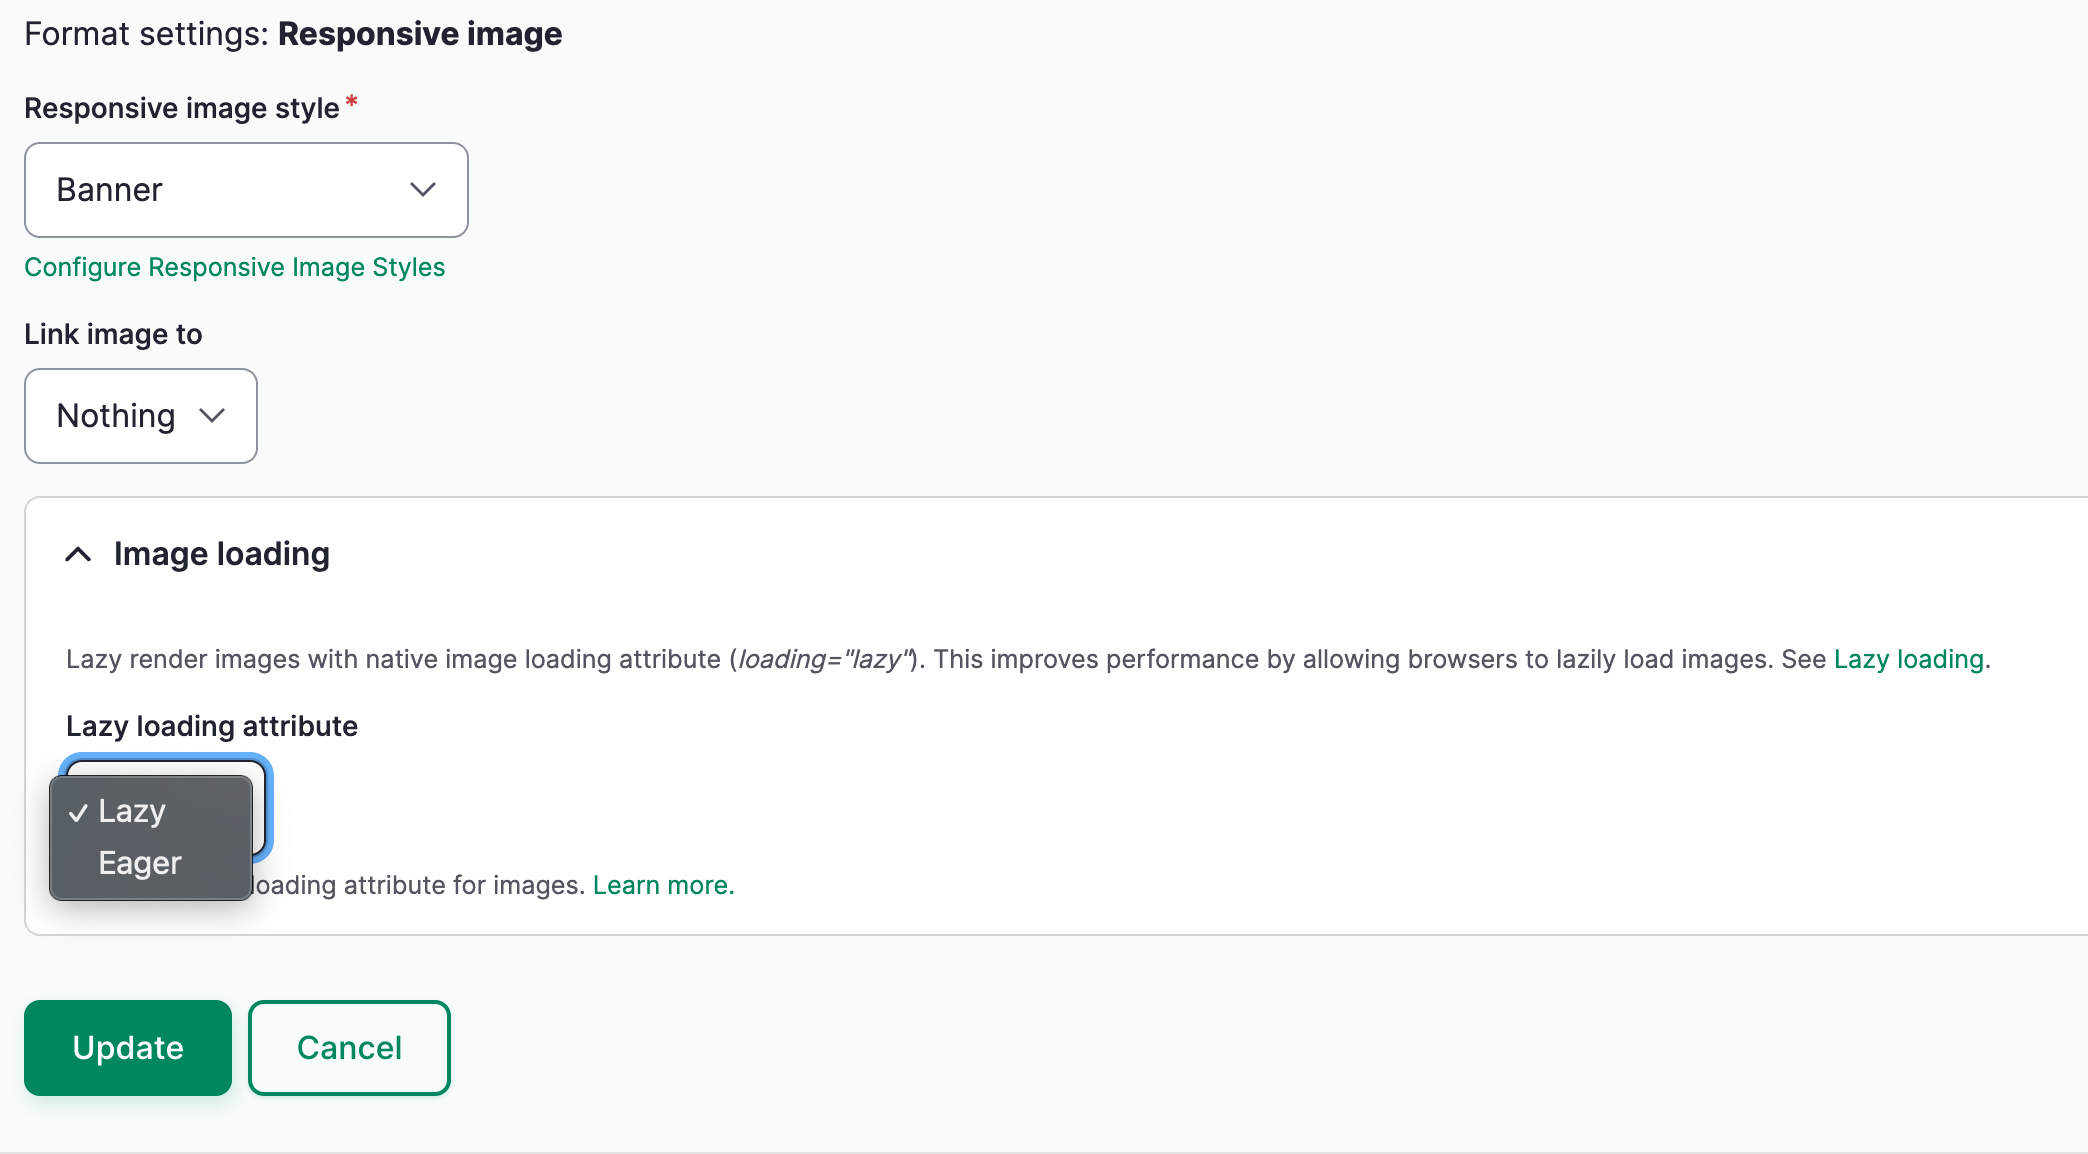 The Drupal admin Ui interface for setting the image loading attribute on a media entity